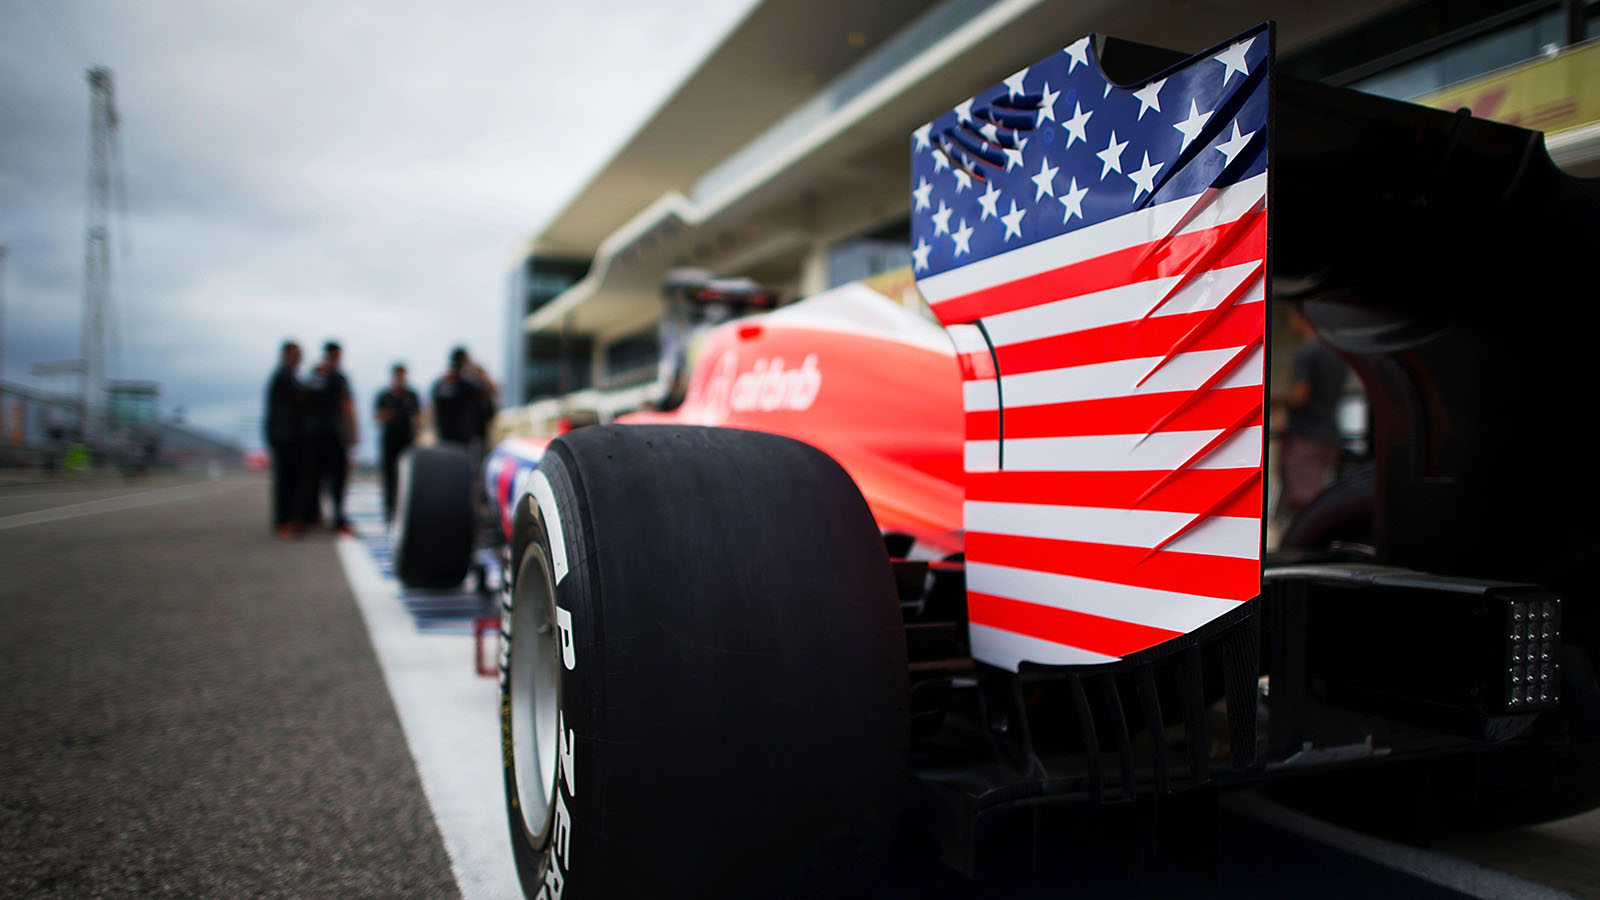 Manor Marussia F1 Team rear wing. United States Grand Prix, October 2015.